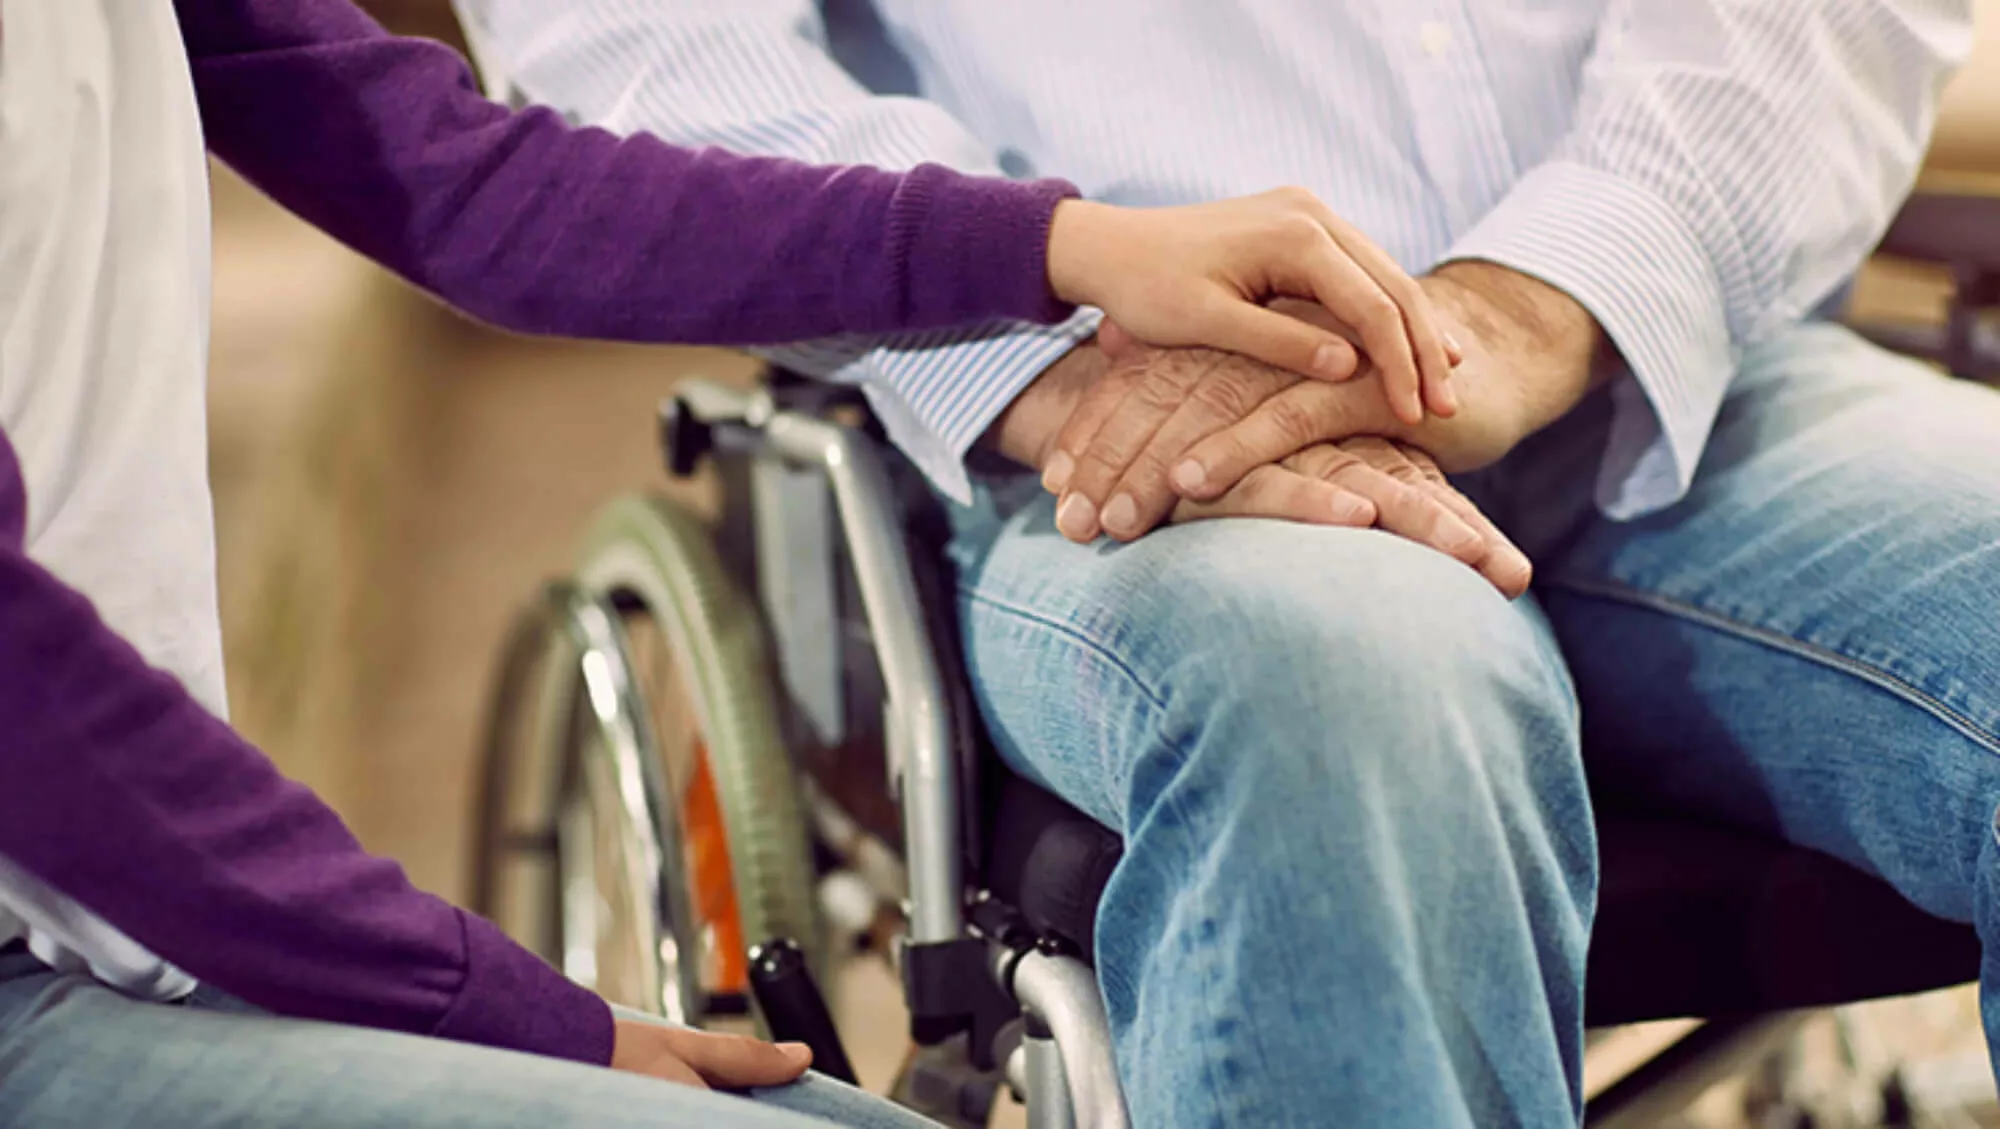 Hands embraced in the lap of a person in a wheelchair.